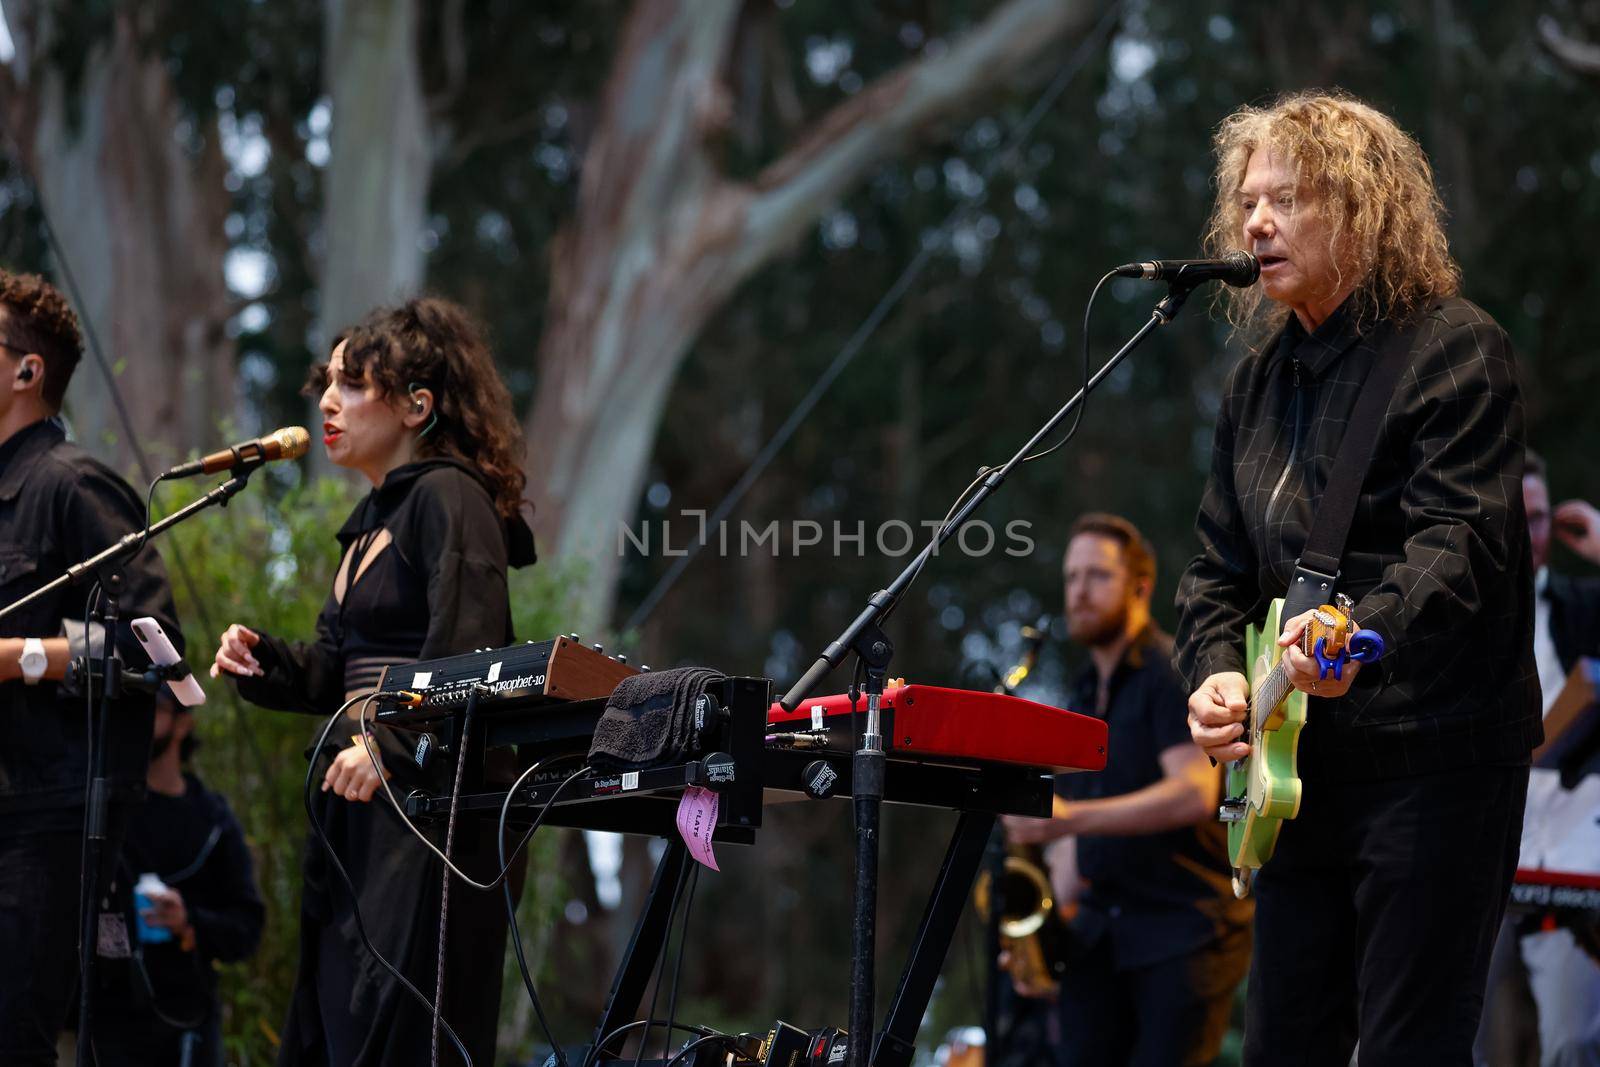 Jerry Harrison at the 2022 Hardly Strictly Bluegrass Festival in Golden Gate Park. by timo043850